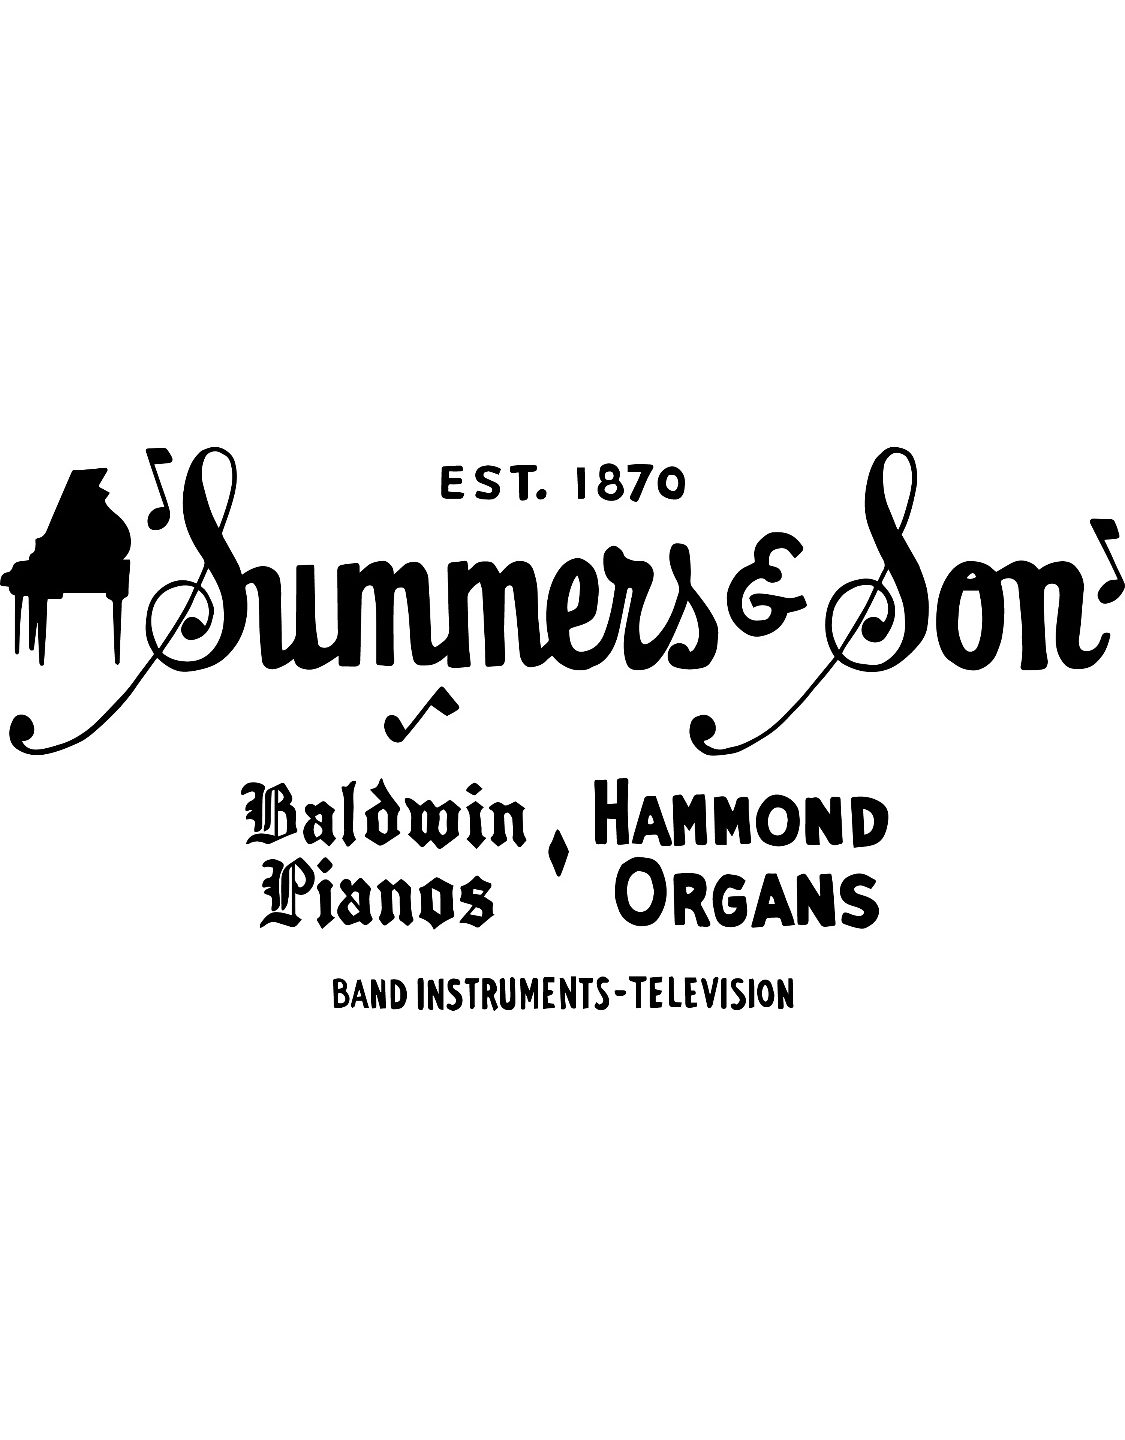 Whitford West and Summers & Son logos